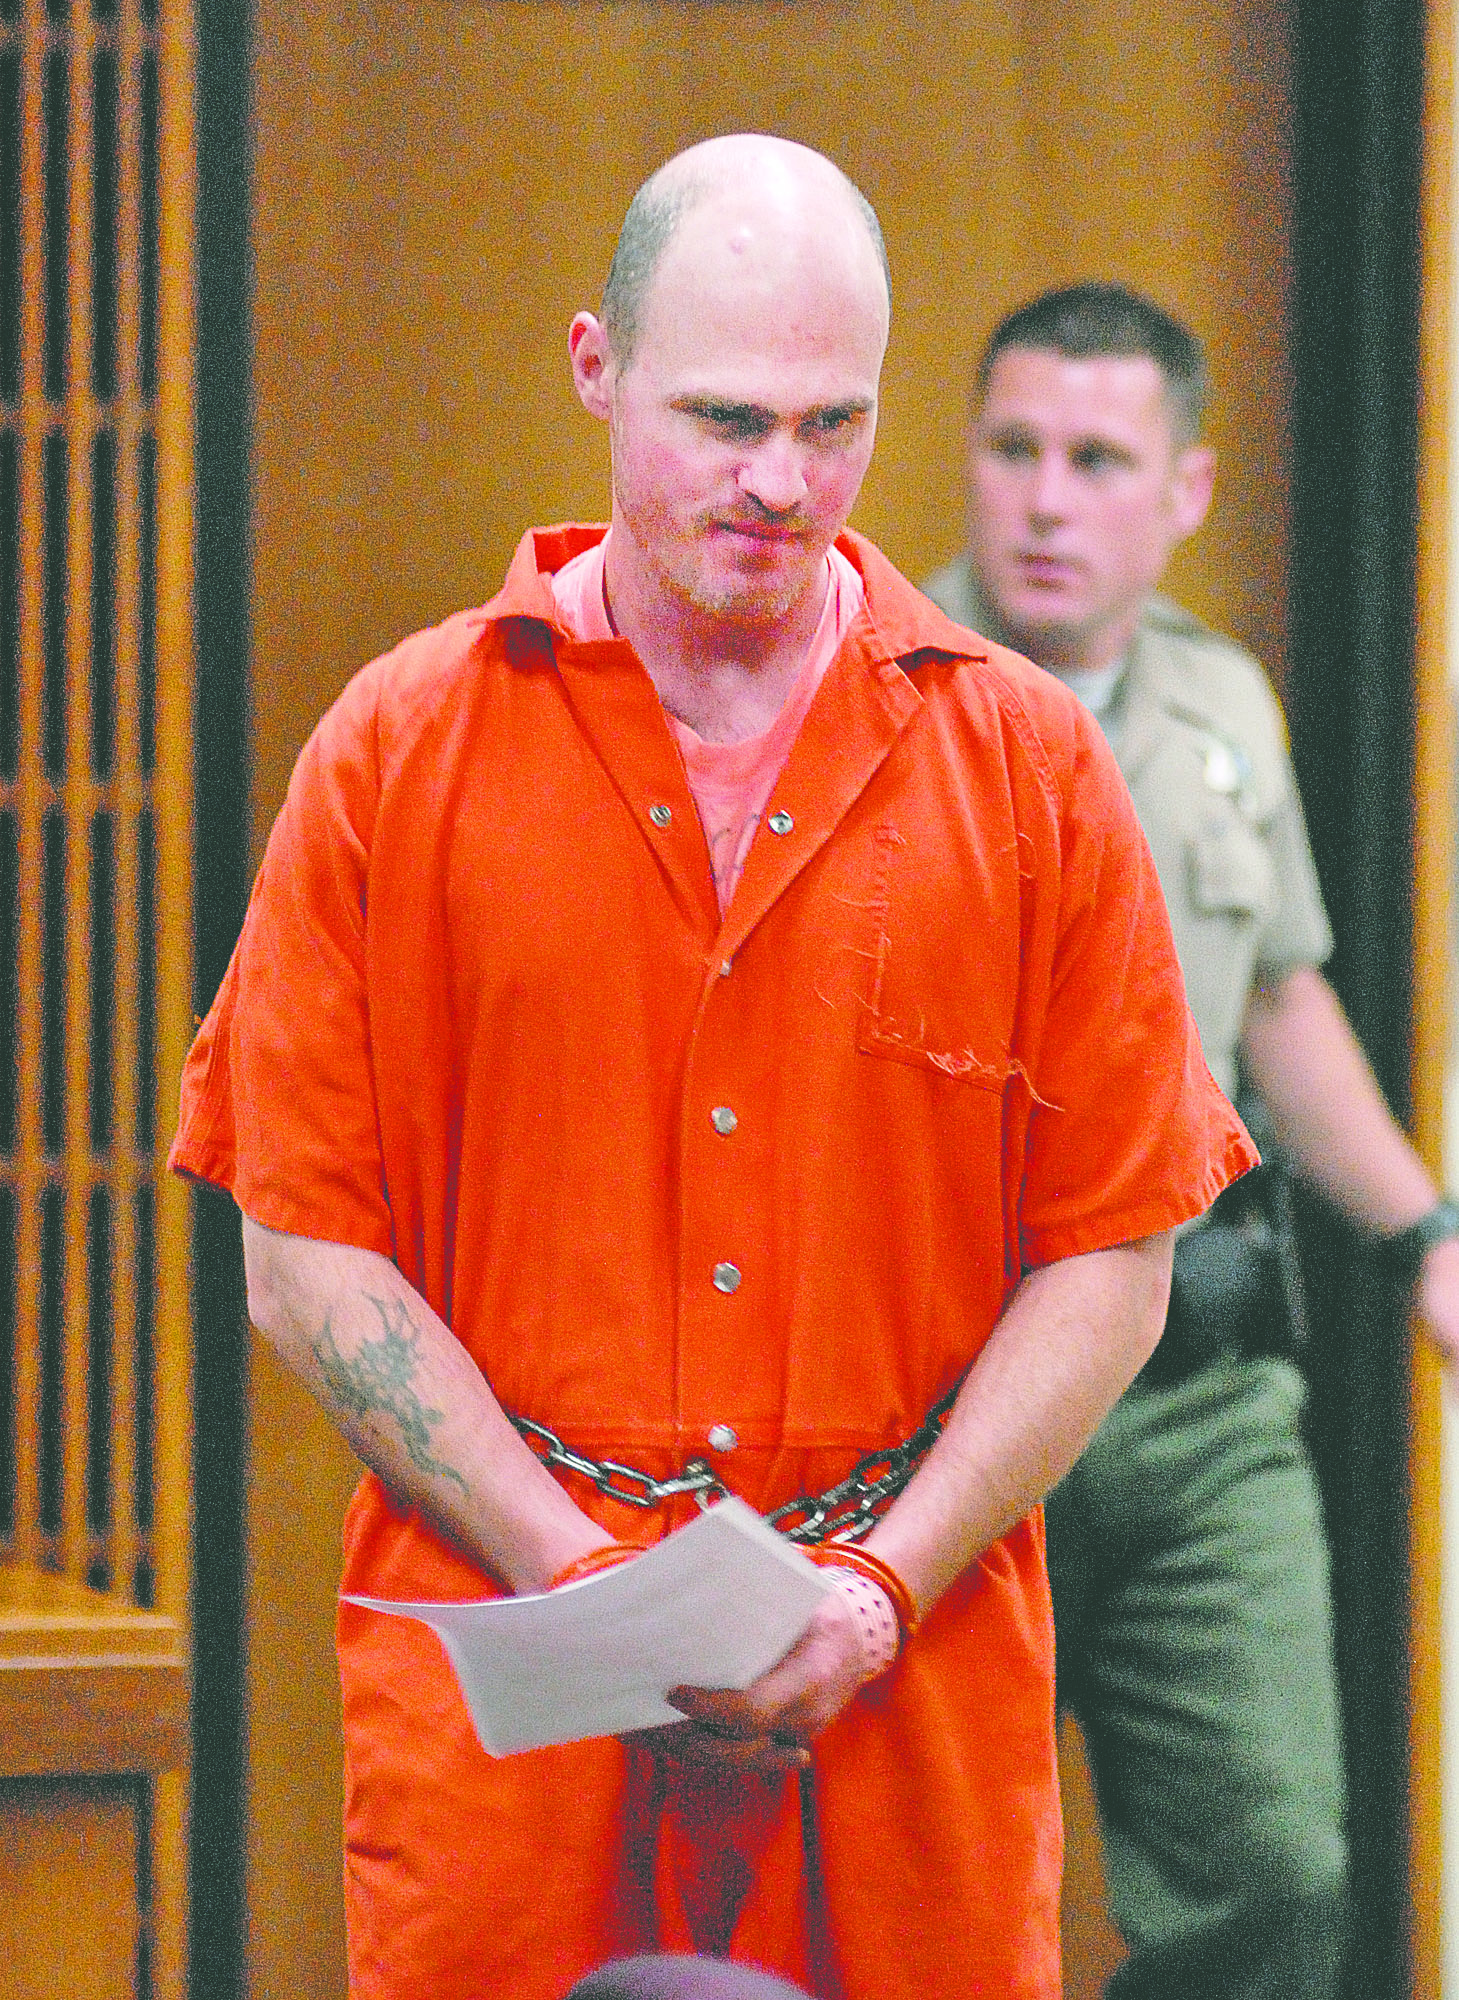 Patrick B. Drum enters the courtroom for his first appearance in Port Angeles on Monday. He is being held in jail without bail. Chris Tucker/Peninsula Daily News